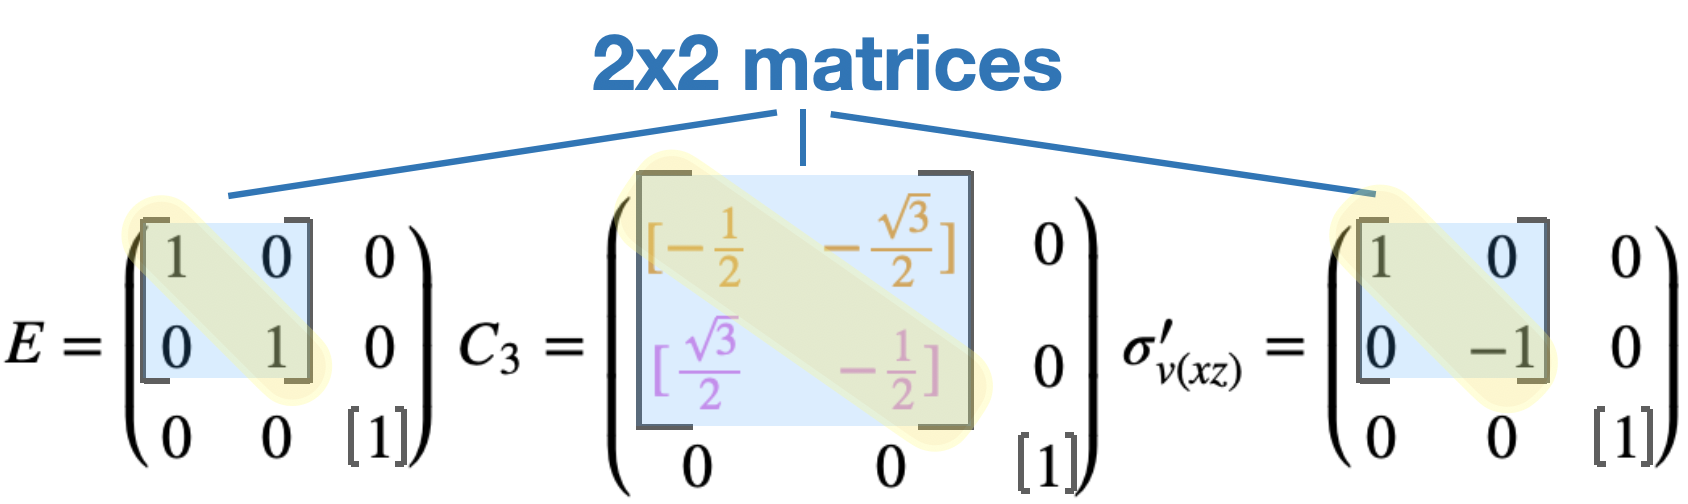 2x2matrices.png